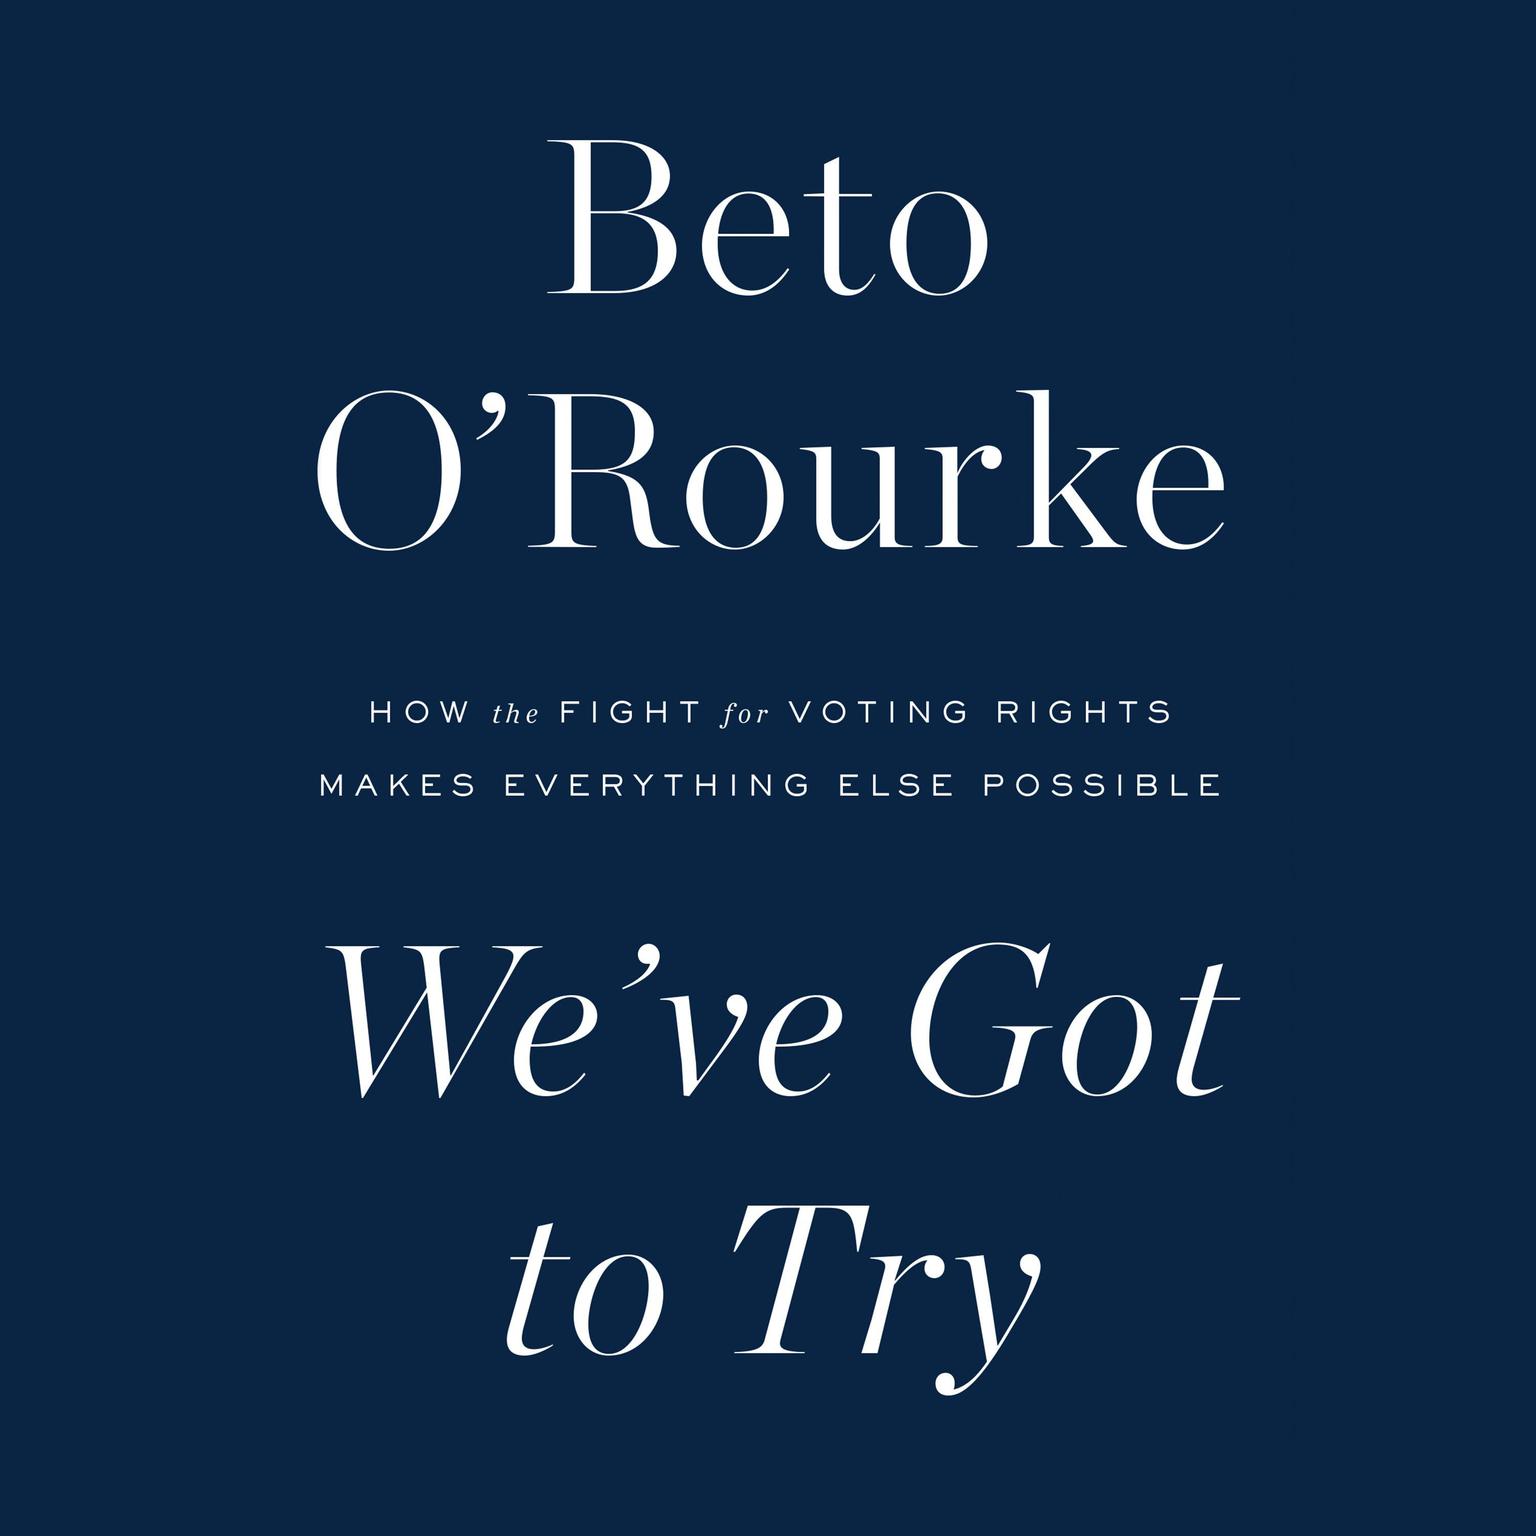 Weve Got to Try: How the Fight for Voting Rights Makes Everything Else Possible Audiobook, by Beto O'Rourke